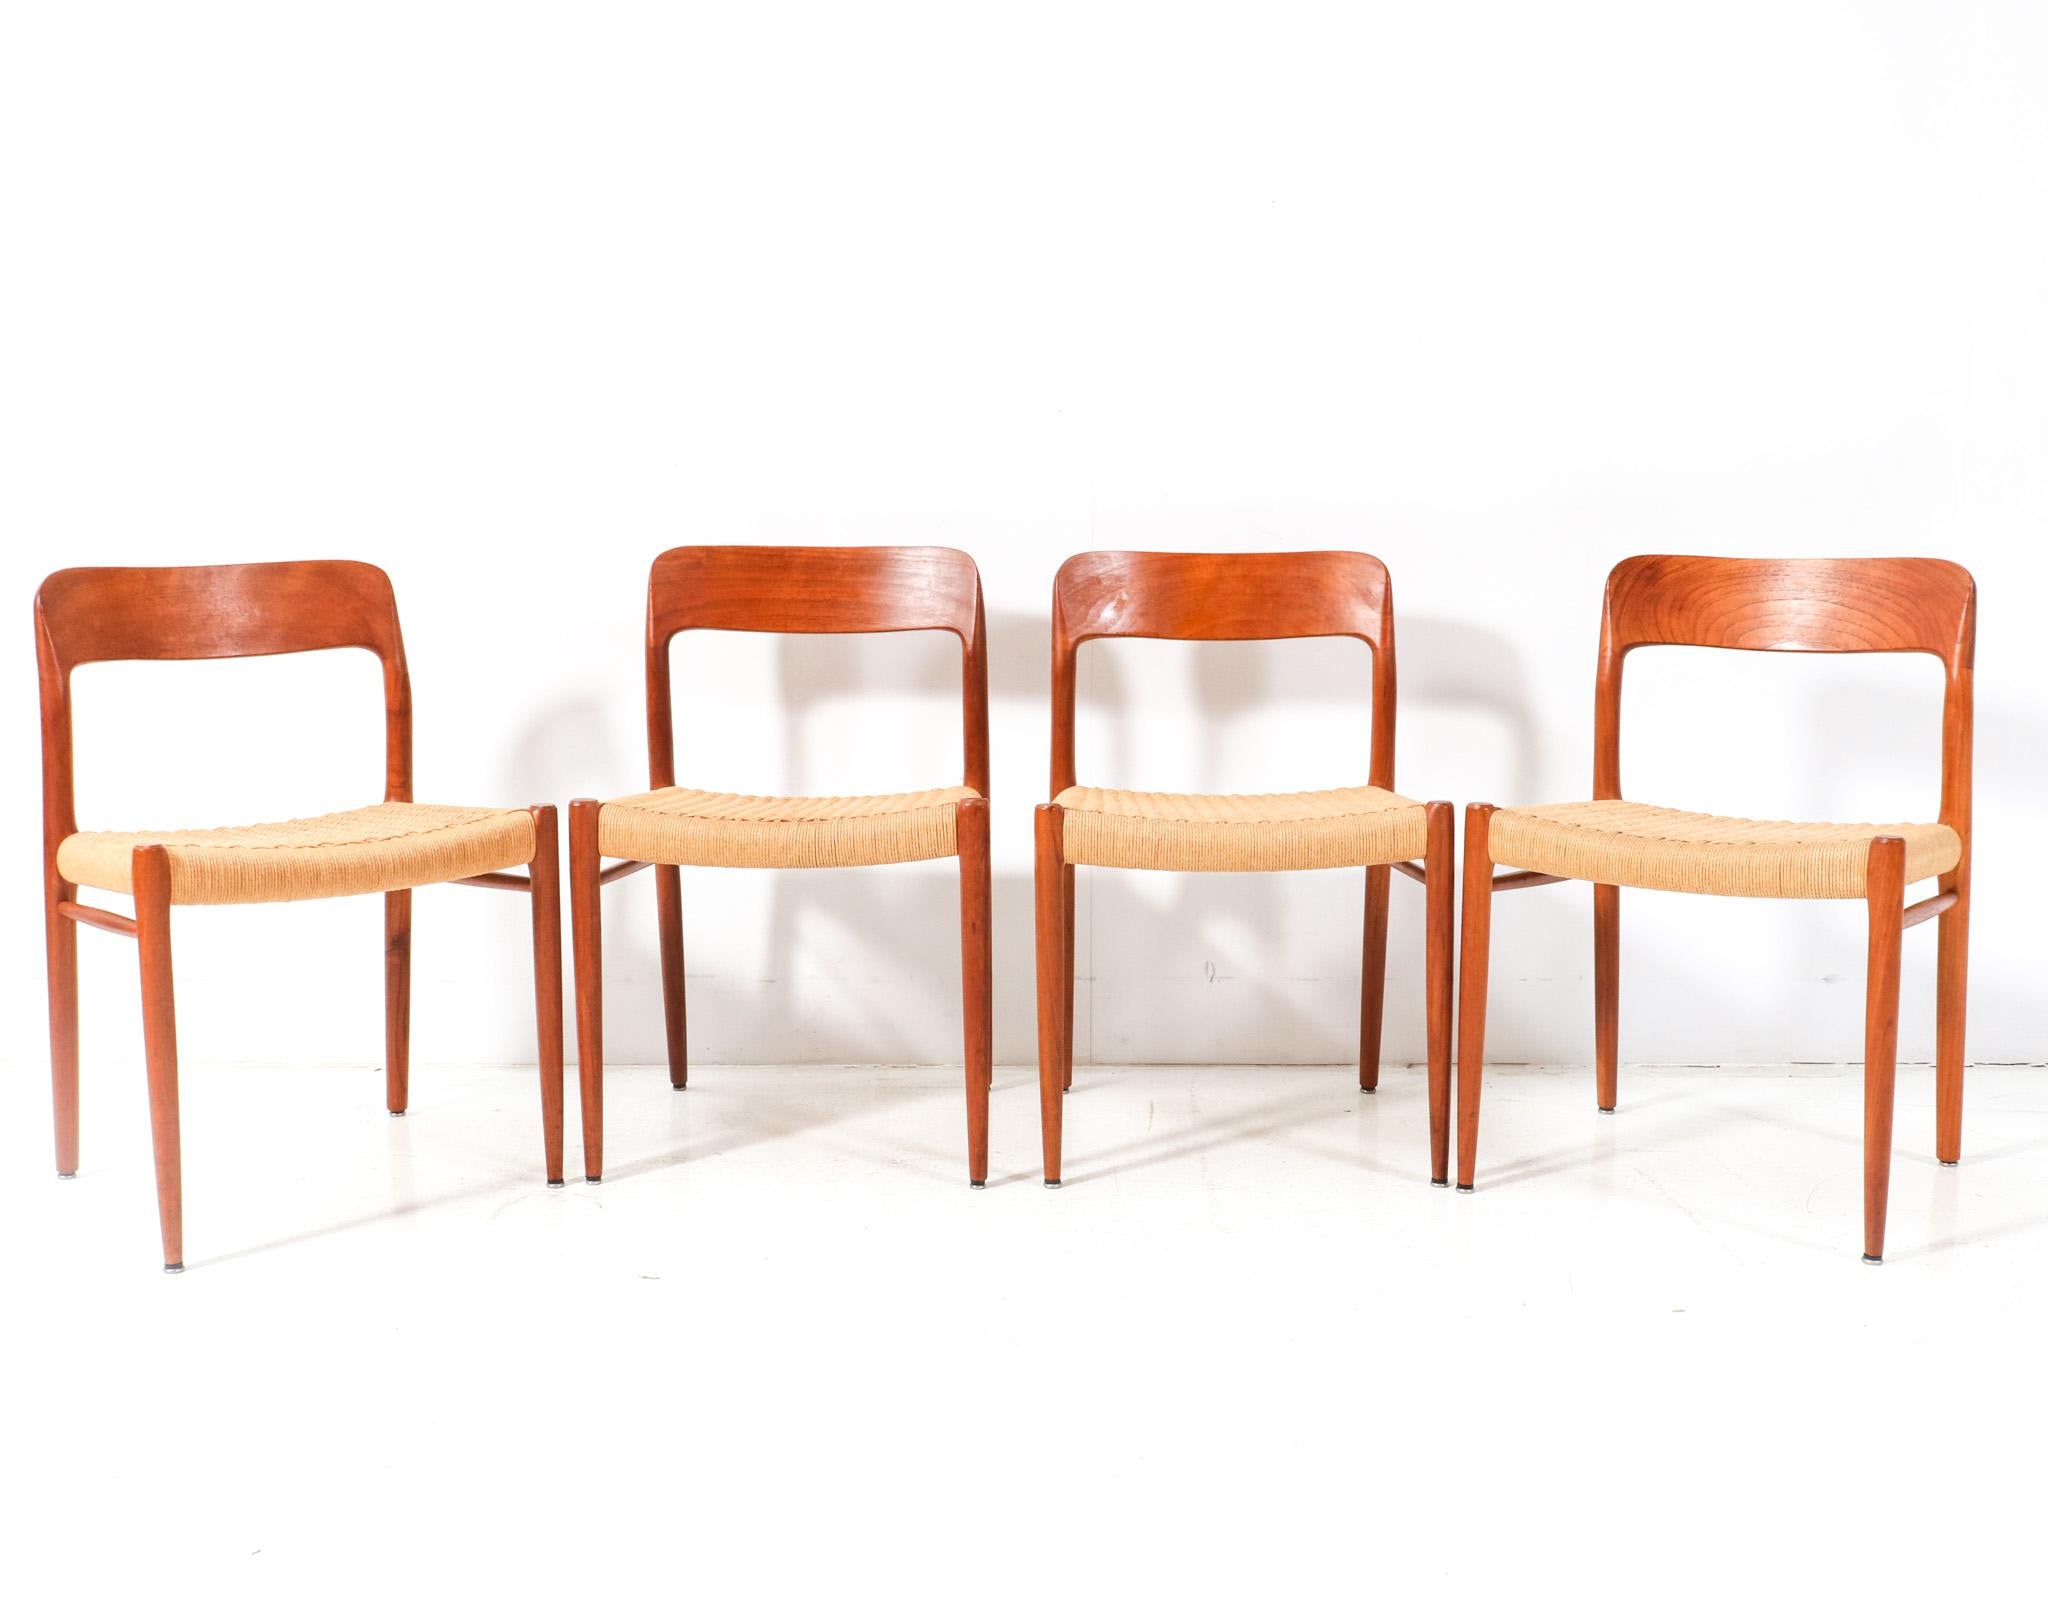 Stunning and elegant set of four Mid-Century Modern Model 75 dining chairs.
Design by Niels Otto Møller for J.L. Møllers Møbelfabrik.
Striking Danish design from the 1950s.
Solid teak frames with the original papercord seating.
This wonderful set of